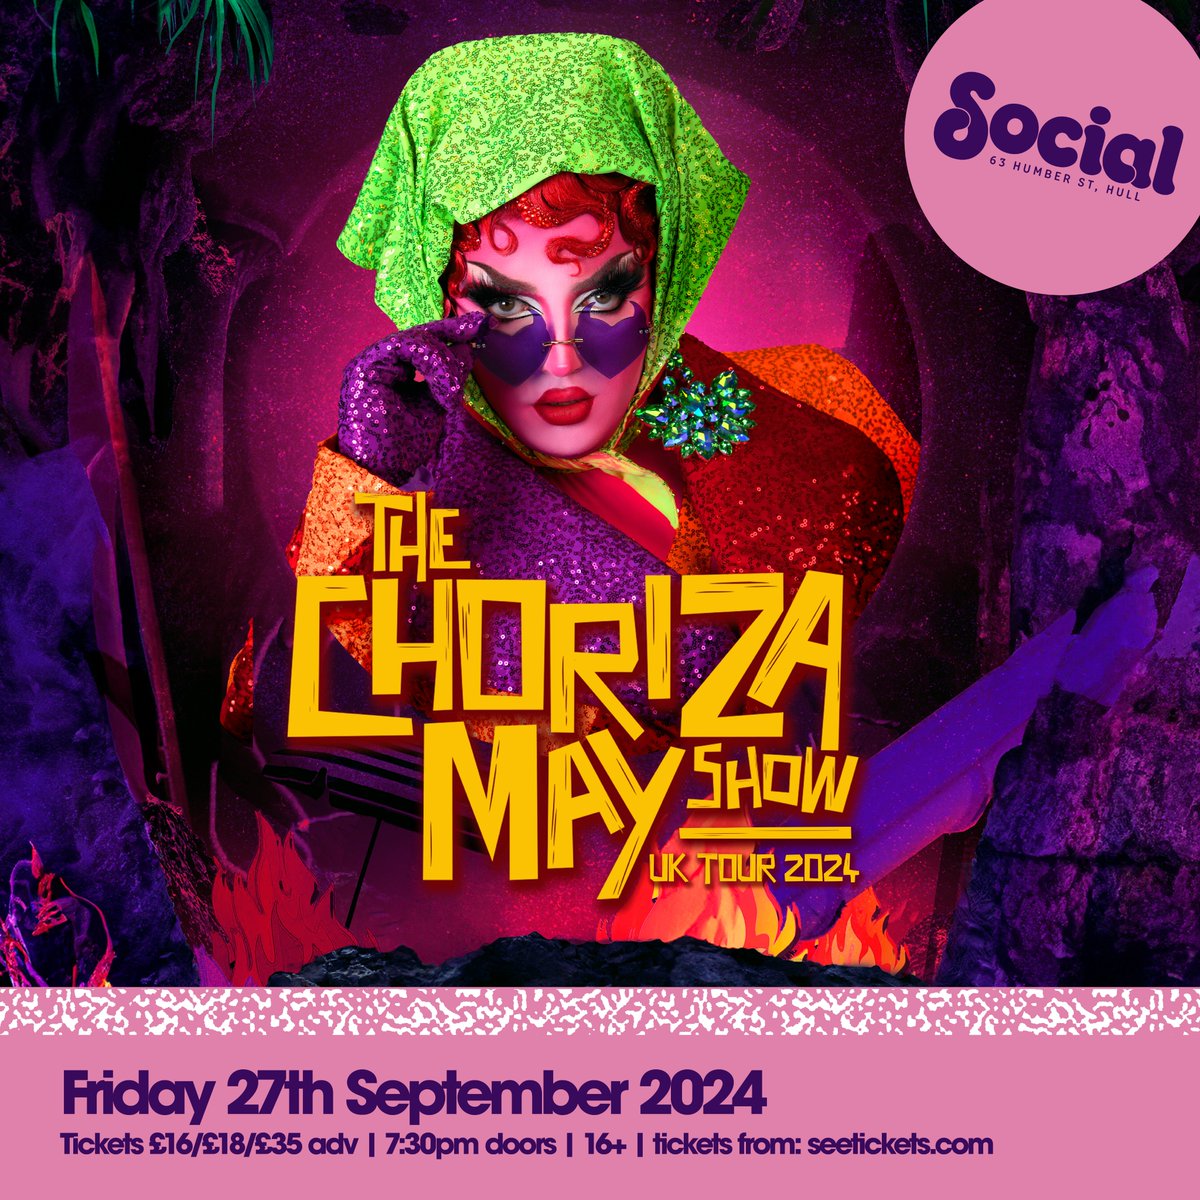 Fresh from their appearance on @dragraceukbbc VS The World, @chorizamay hits the road with their first-ever solo show extravaganza! 📅 Friday 27th September 🎟 bit.ly/TheChorizaMayS… You can expect big drag energy, lots of laughs, breathtaking lip syncs, and dazzling costumes.